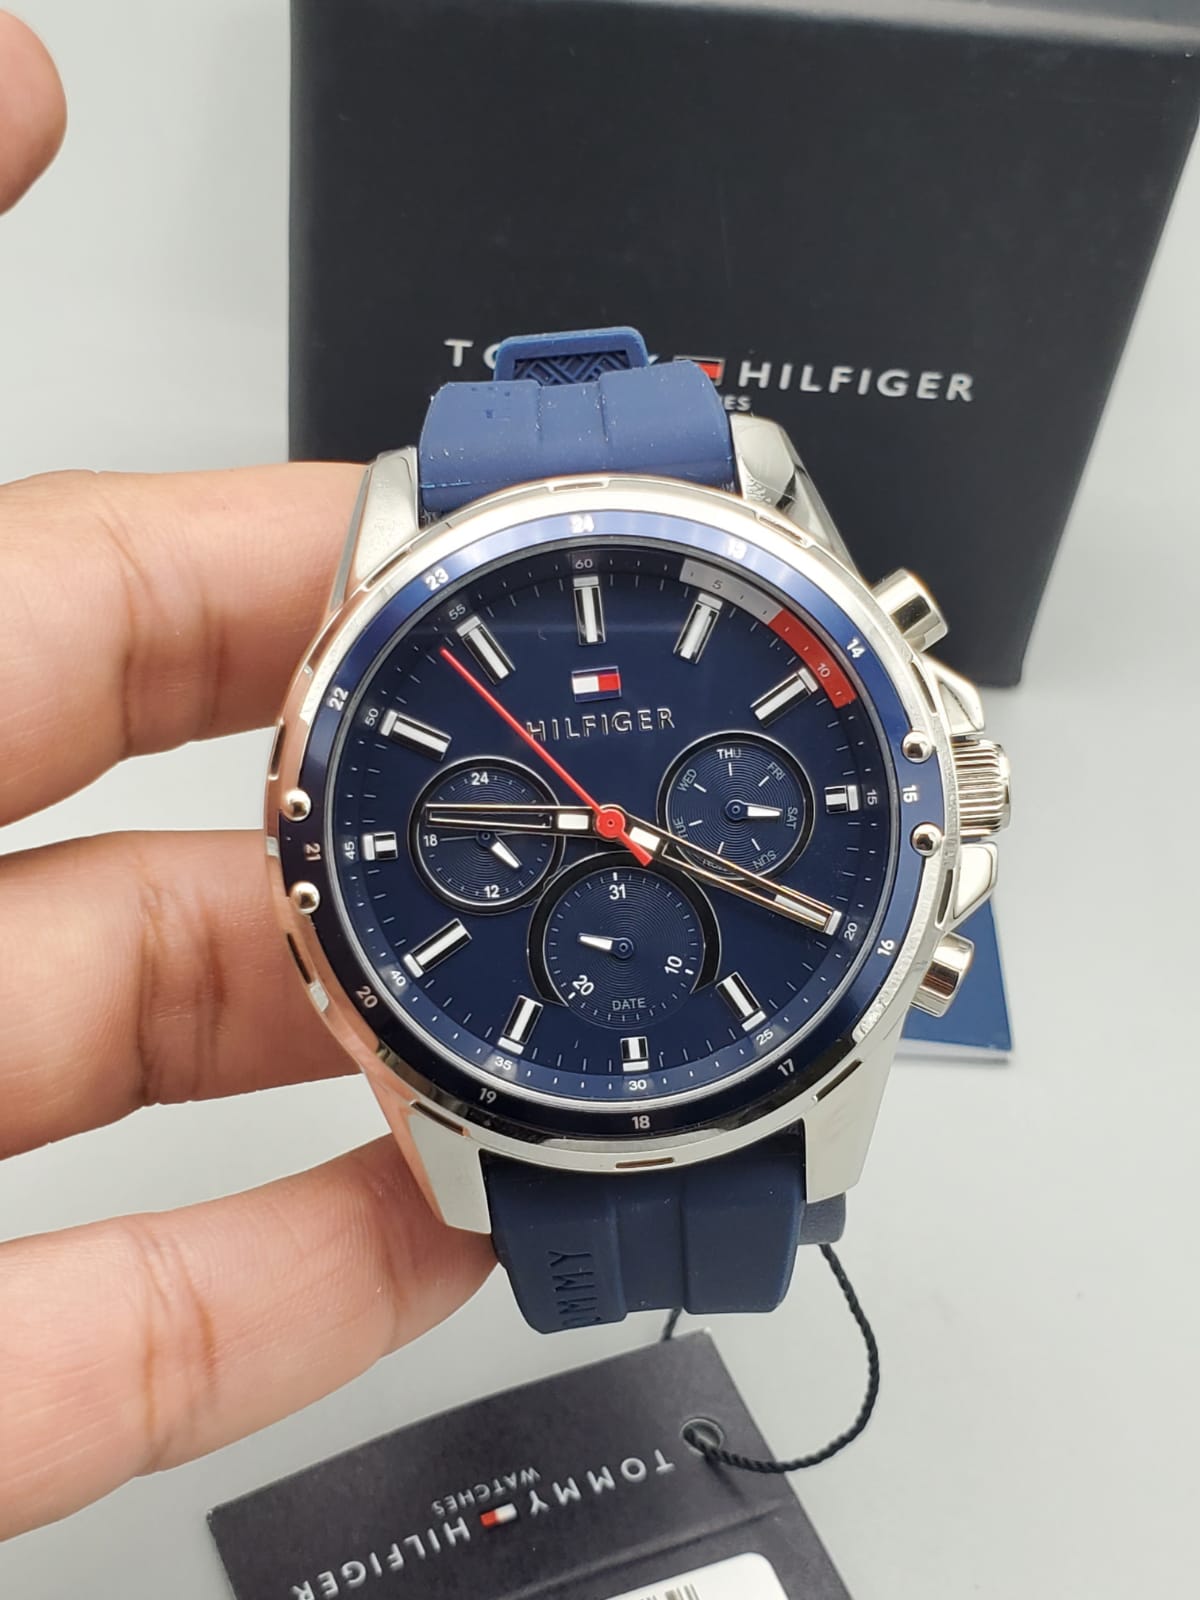 Tommy Hilfiger Men's Analogue Quartz Watch with Silicone Strap 1791791